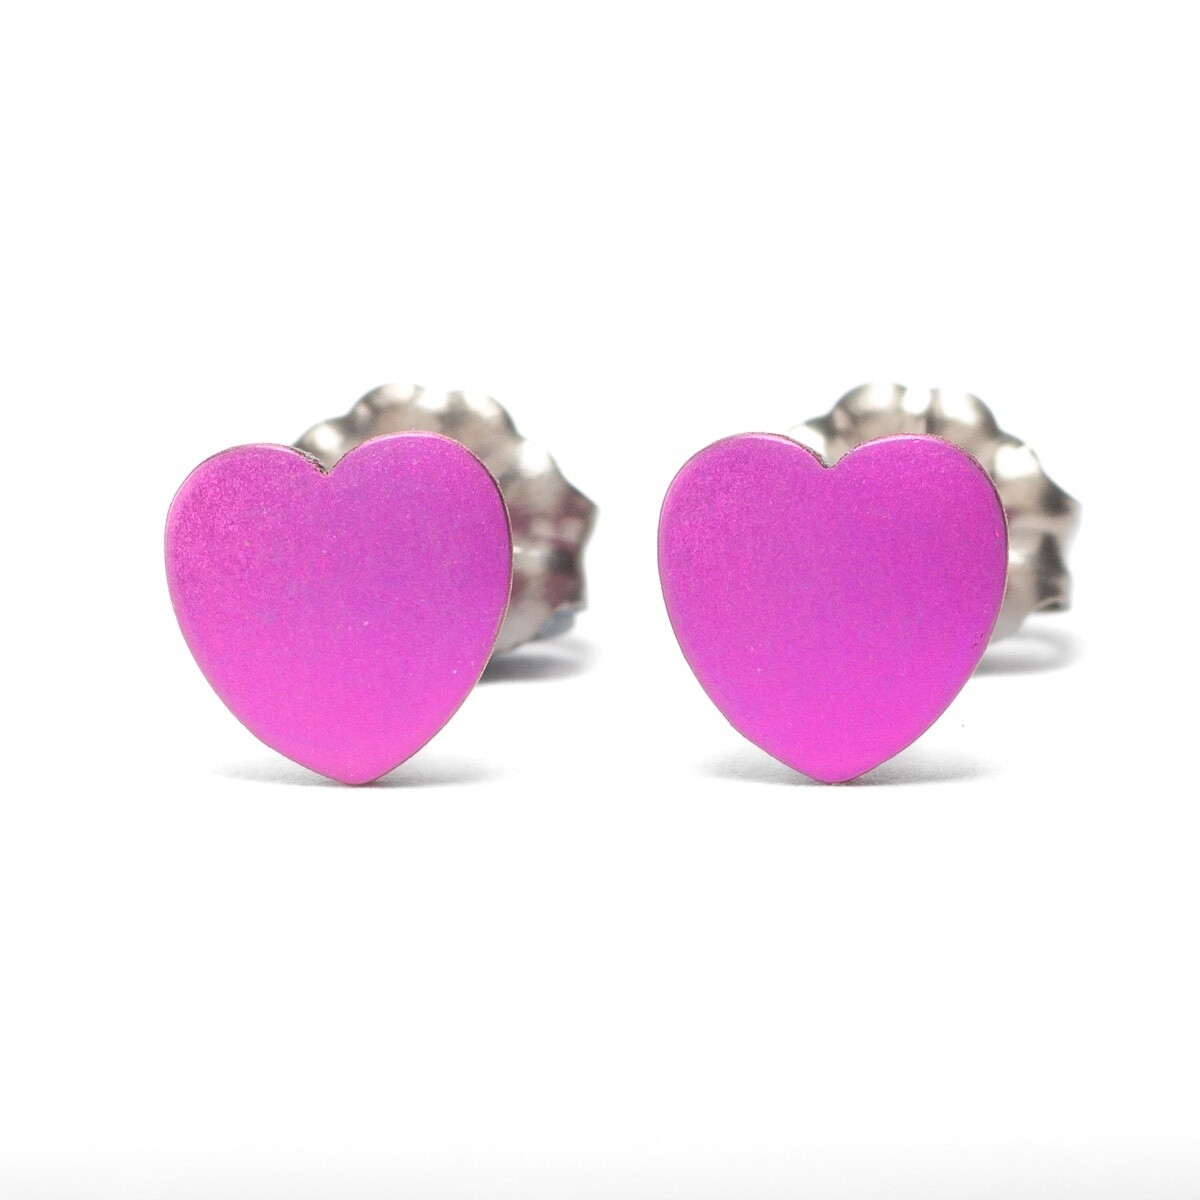 Titanium Heart Studs - Small - Pink by Prism Design